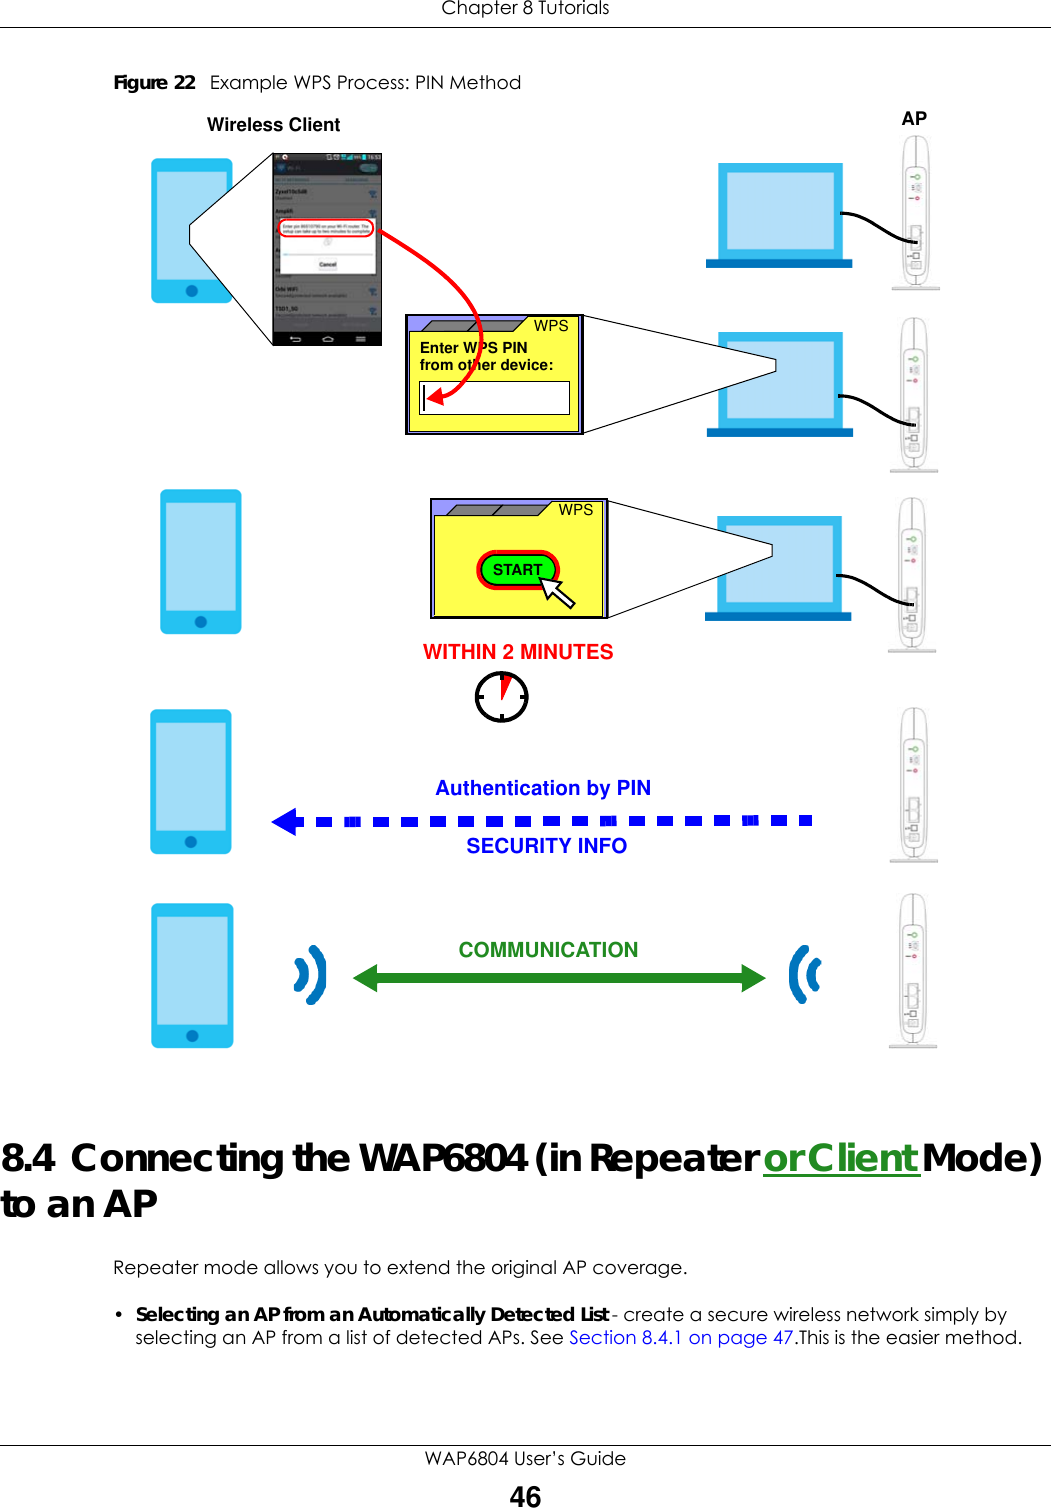 Chapter 8 TutorialsWAP6804 User’s Guide46Figure 22   Example WPS Process: PIN Method8.4  Connecting the WAP6804 (in Repeater or Client Mode) to an APRepeater mode allows you to extend the original AP coverage.•Selecting an AP from an Automatically Detected List - create a secure wireless network simply by selecting an AP from a list of detected APs. See Section 8.4.1 on page 47.This is the easier method.Authentication by PINSECURITY INFOWITHIN 2 MINUTESWireless ClientCOMMUNICATIONEnter WPS PIN  WPSfrom other device: WPSSTARTAP